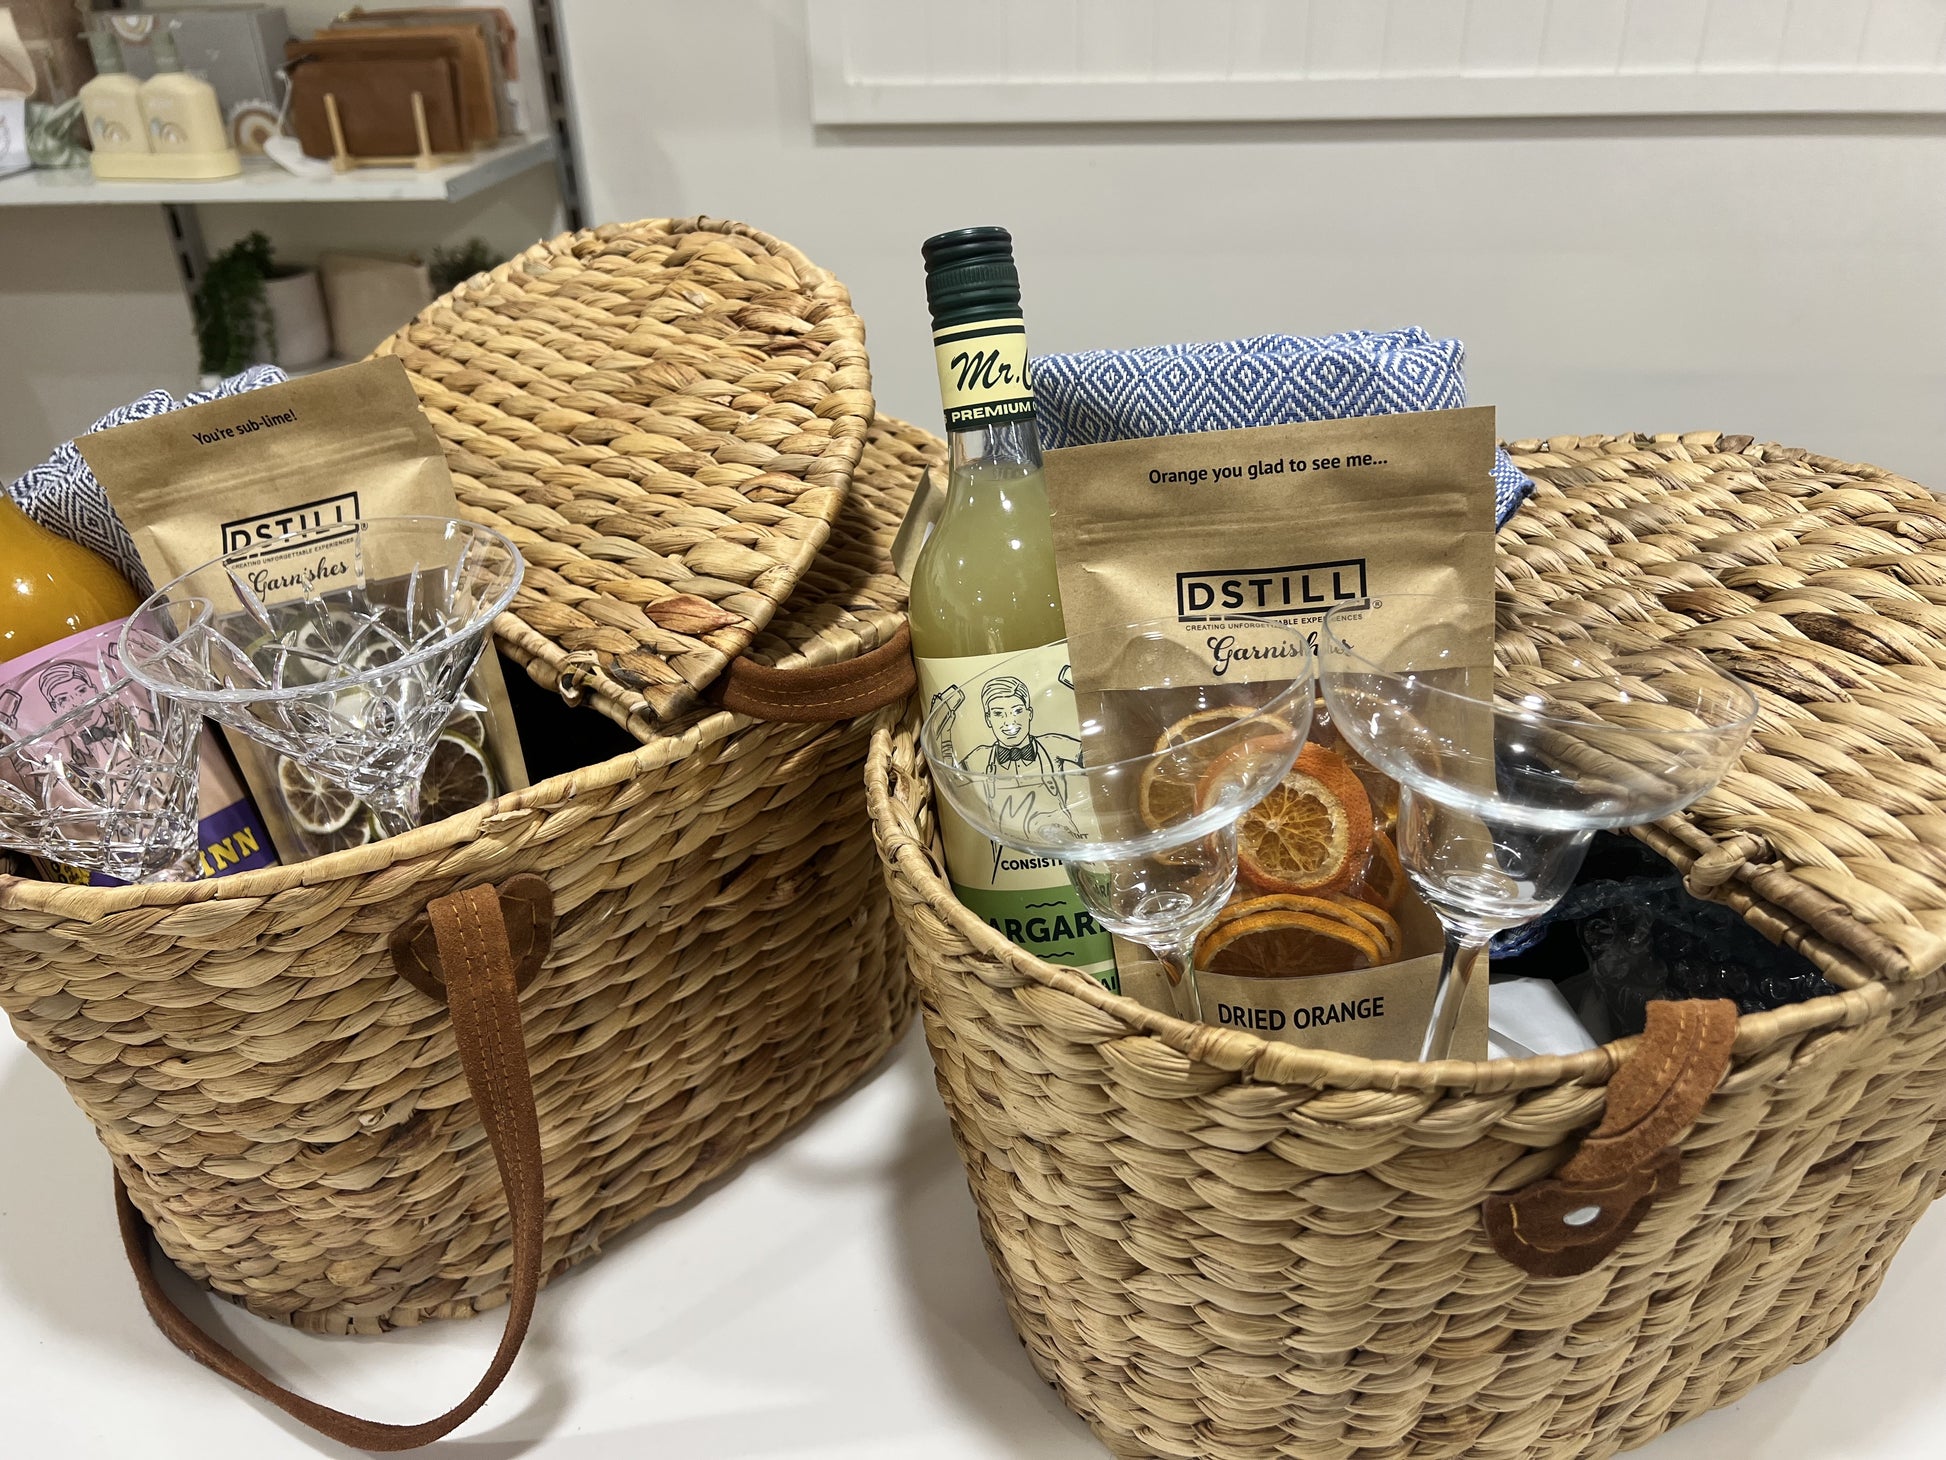 Make the ultimate outdoor date night special with this Cocktail Picnic Basket Gift, complete with a picnic basket, Mr. Consistent cocktail mix, dried fruit, a picnic throw, and DTILL cocktail glasses. Enjoy the sunshine and outdoor adventures with a side of redefined luxury!